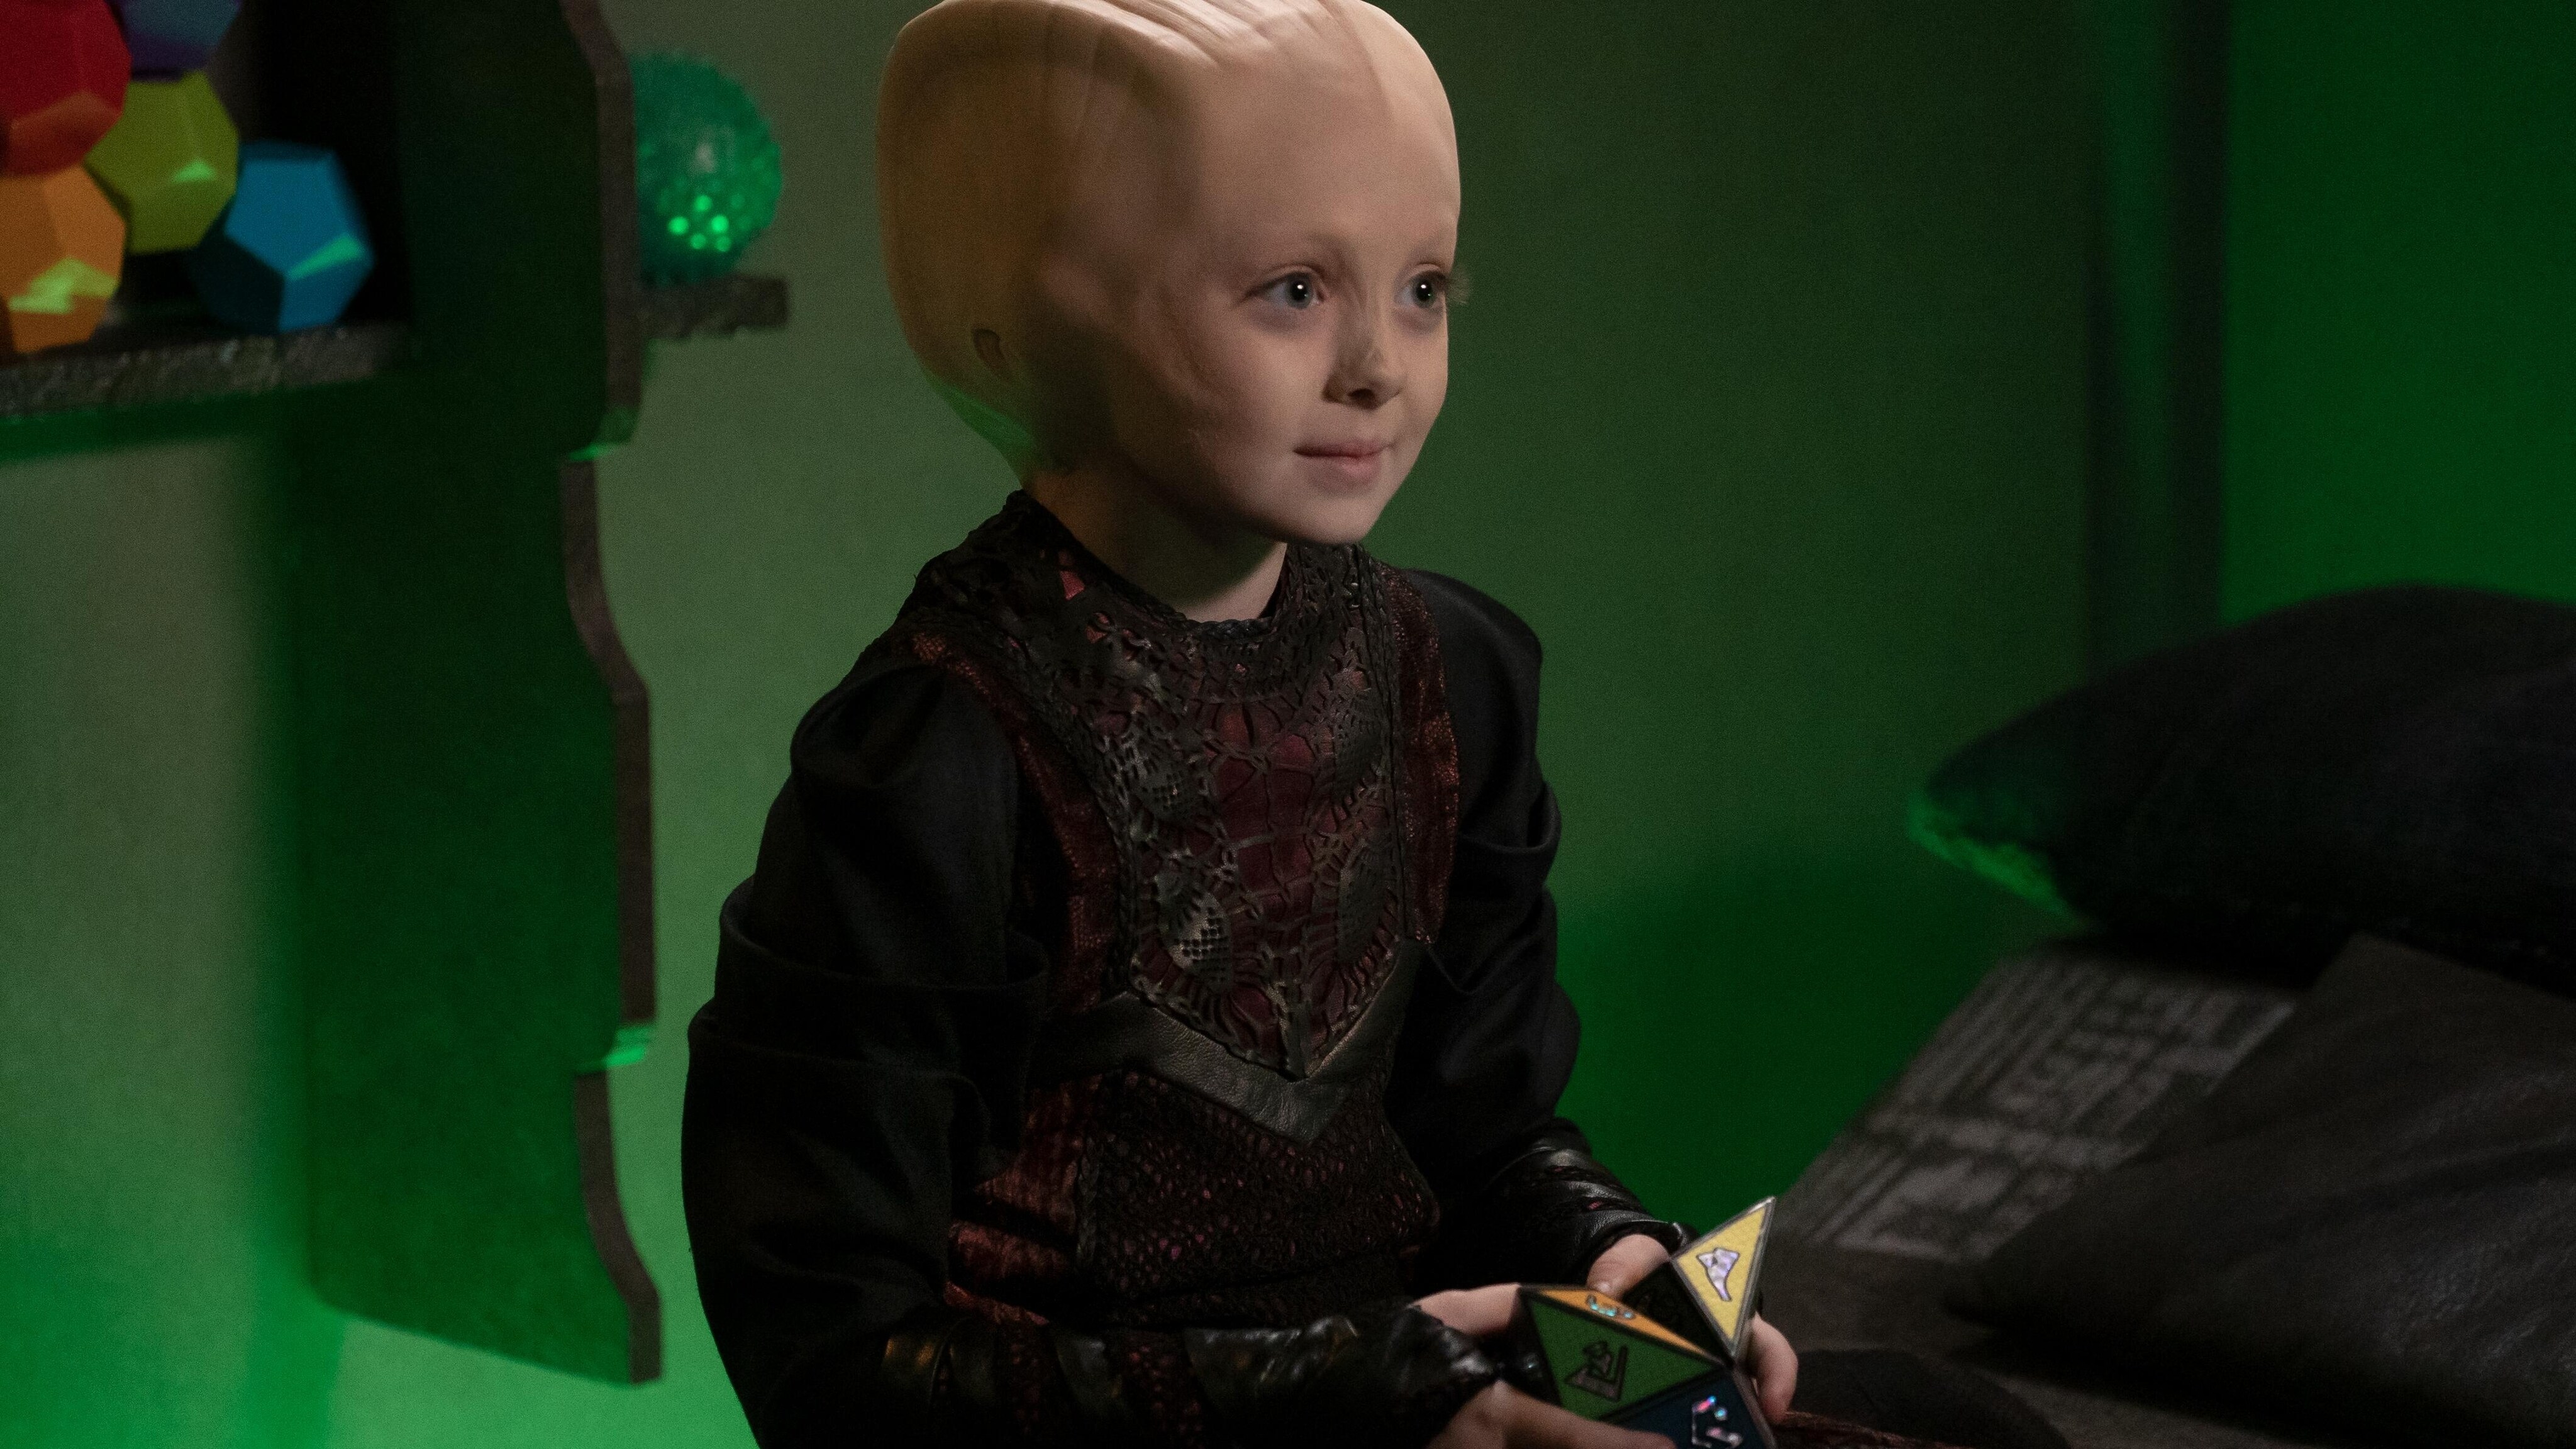 The Orville: New Horizons -- “Gently Falling Rain” - Episode 304 -- The Orville crew leads a Union delegation to sign a peace treaty with the Krill. (Photo by: Kevin Estrada/Hulu)